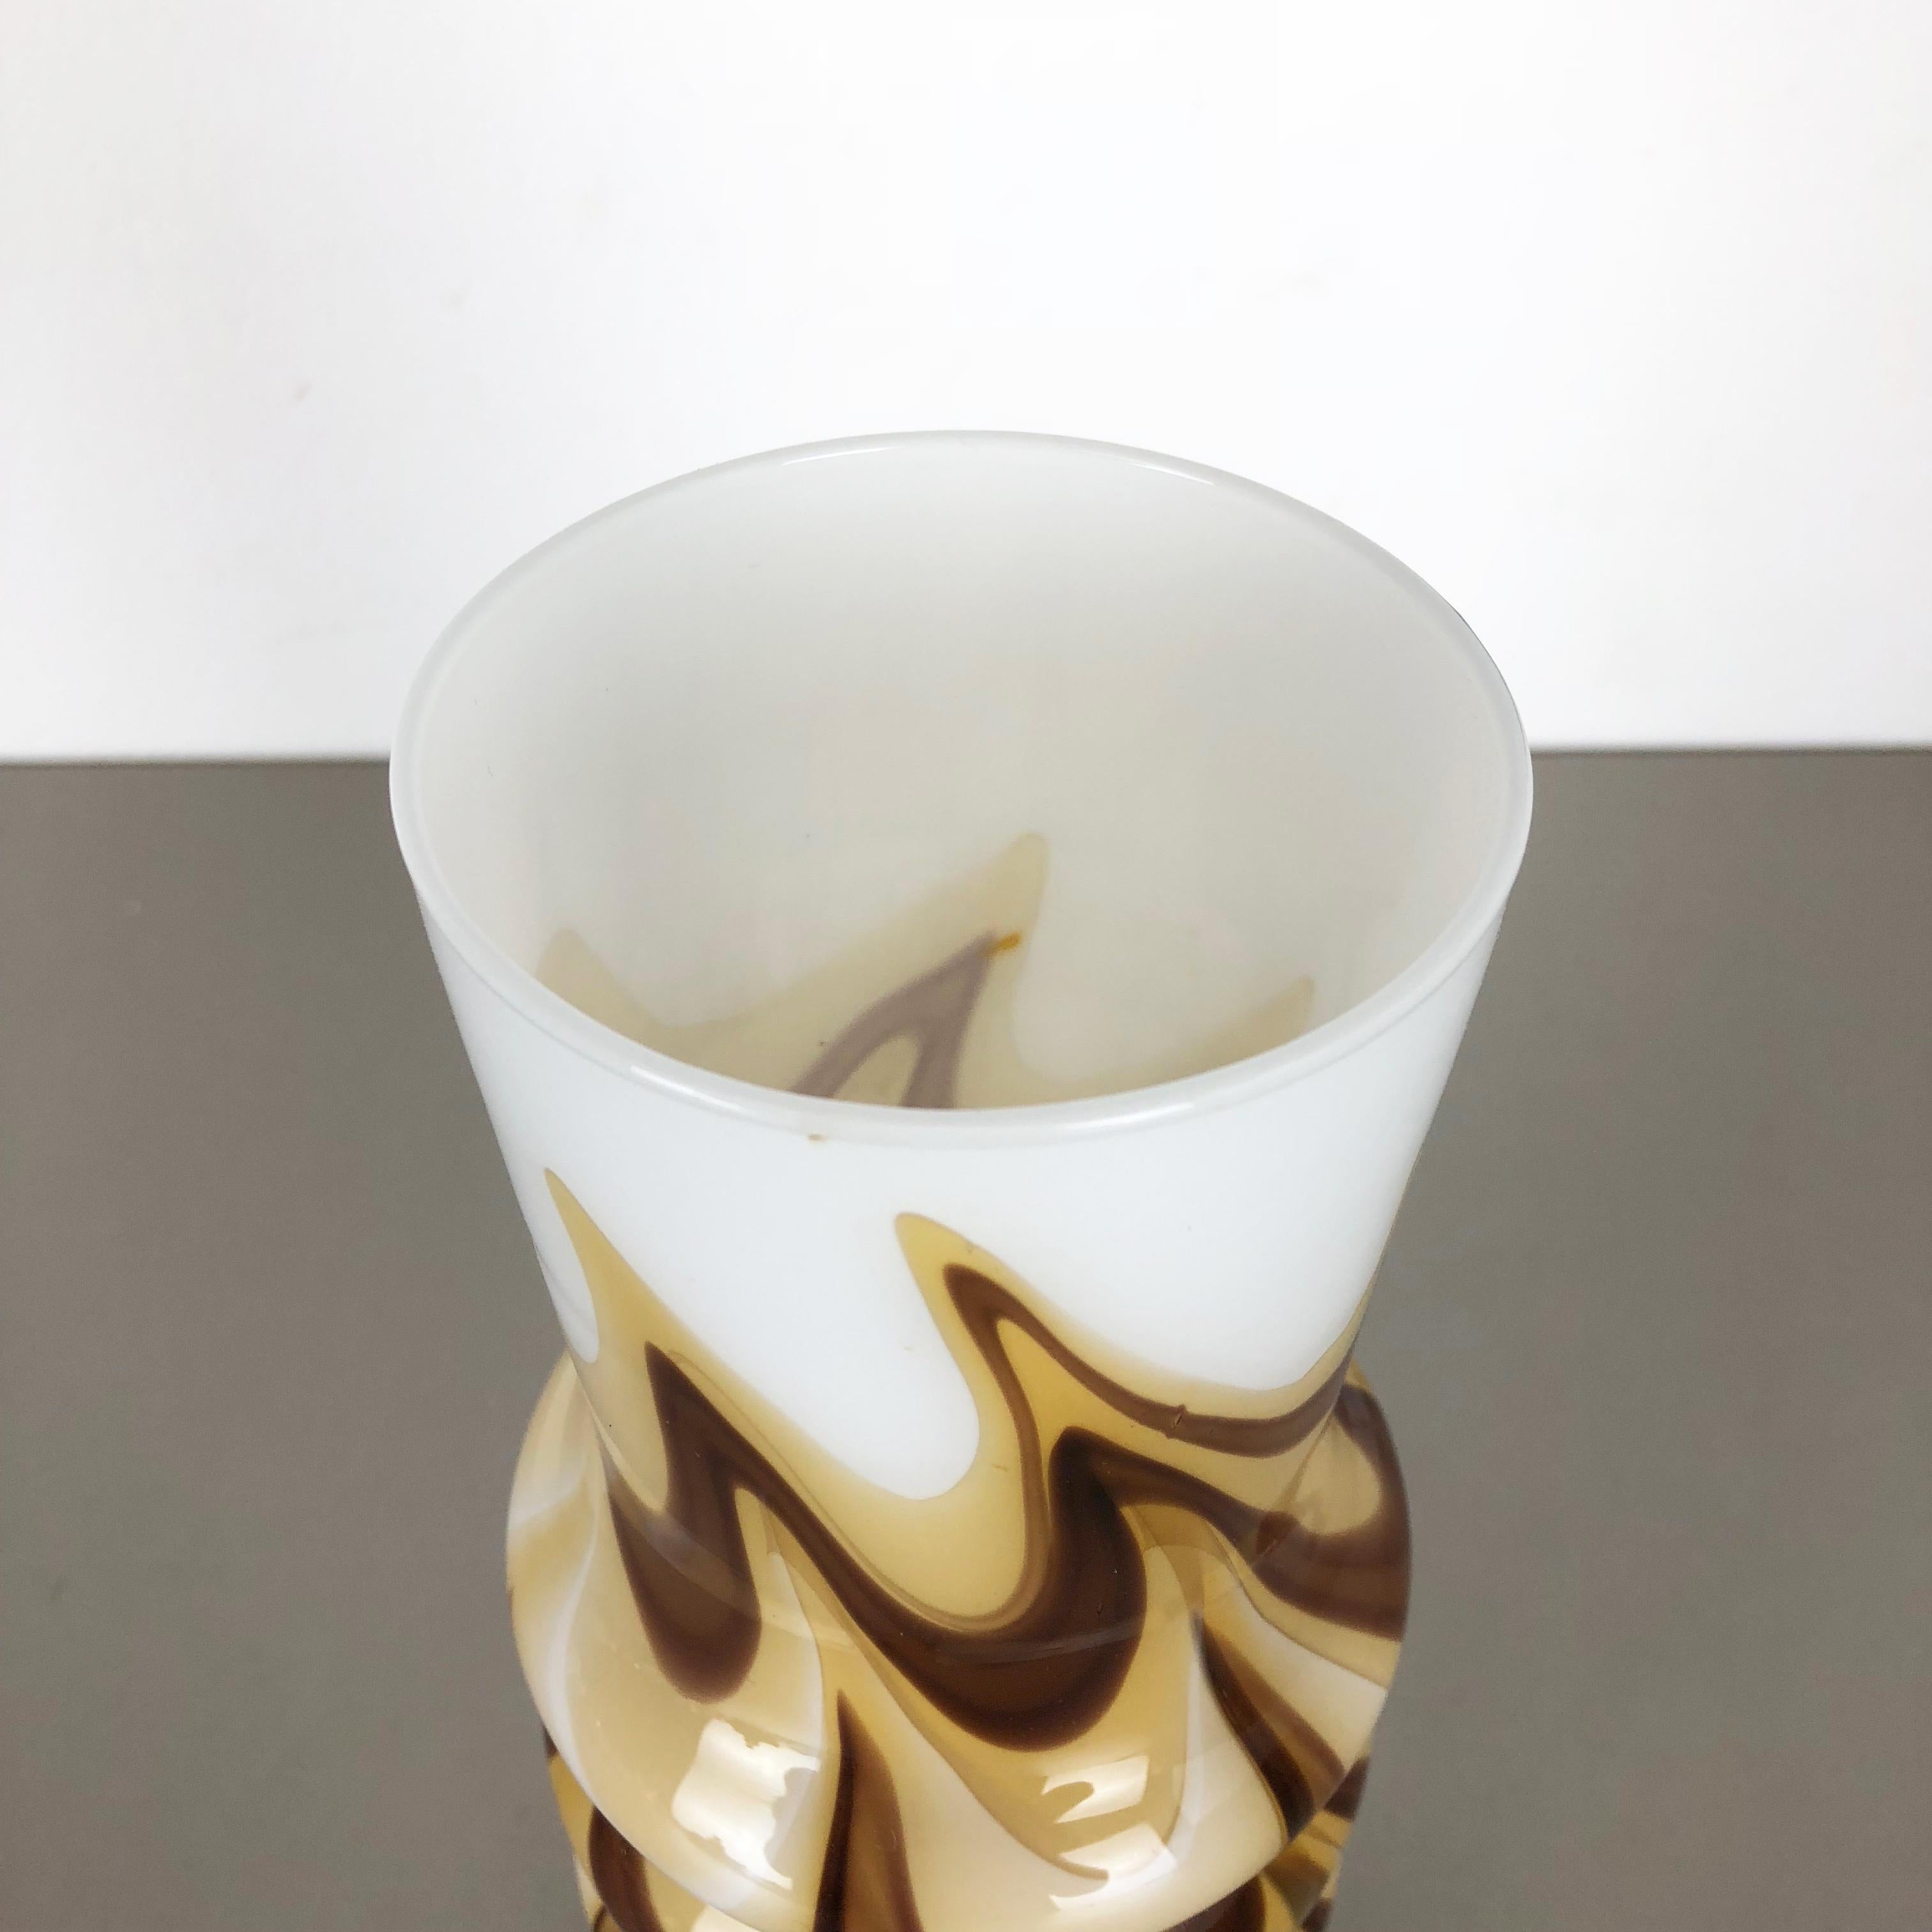 Glass Vintage 1970s Pop Art Opaline Florence Vase Designed by Carlo Moretti, Italy For Sale